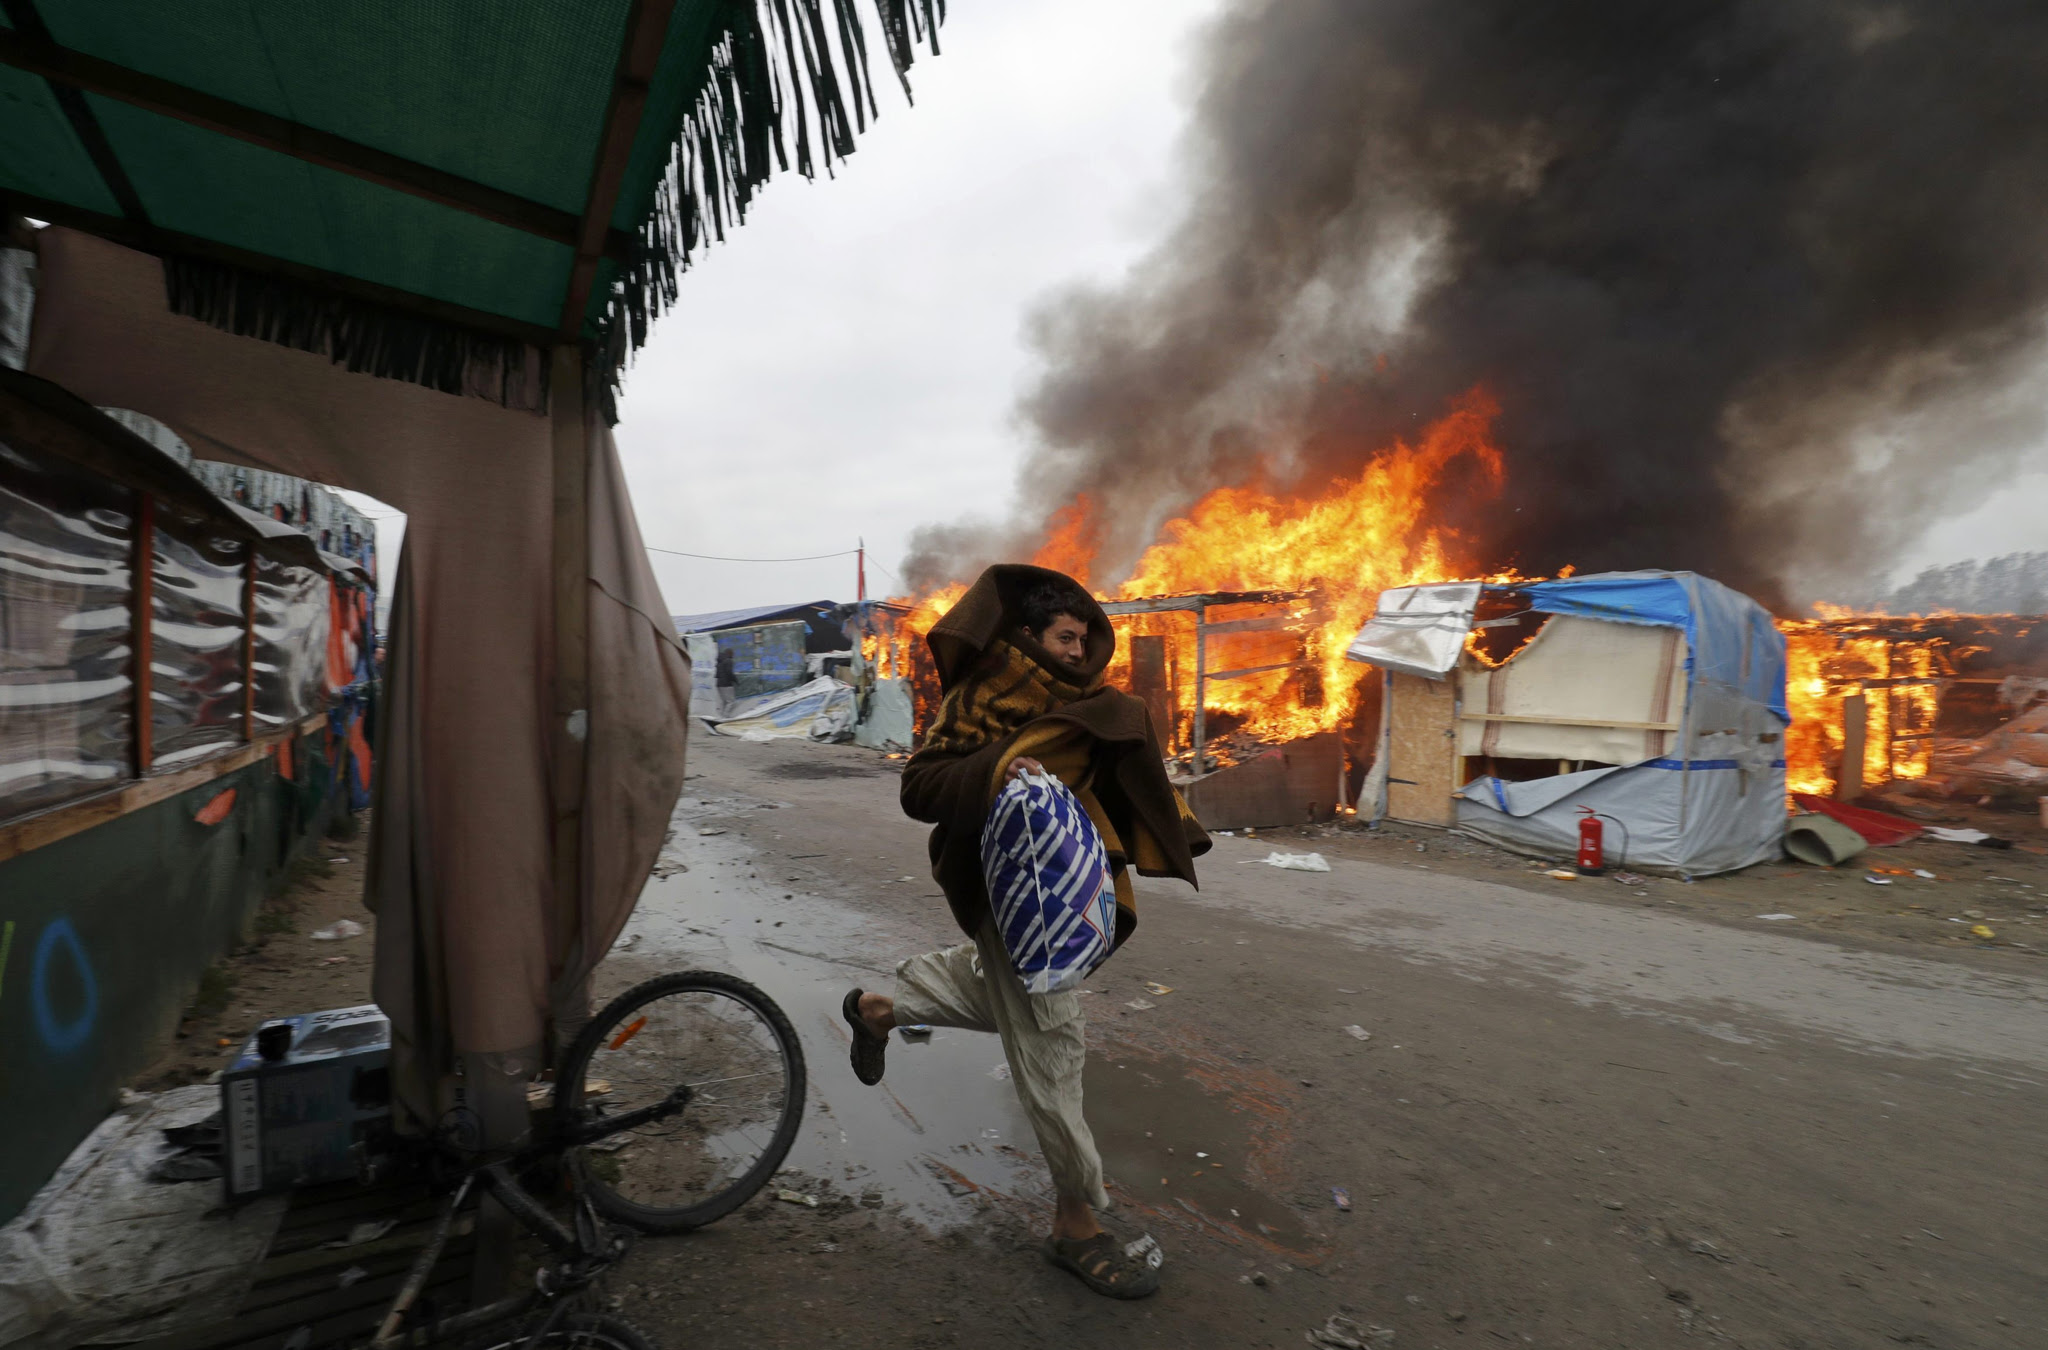 A migrant runs past a burning makeshift shelters in the "Jungle" on the third day of their evacuation and transfer to reception centers in France, as part of the dismantlement of the camp in Calais, France